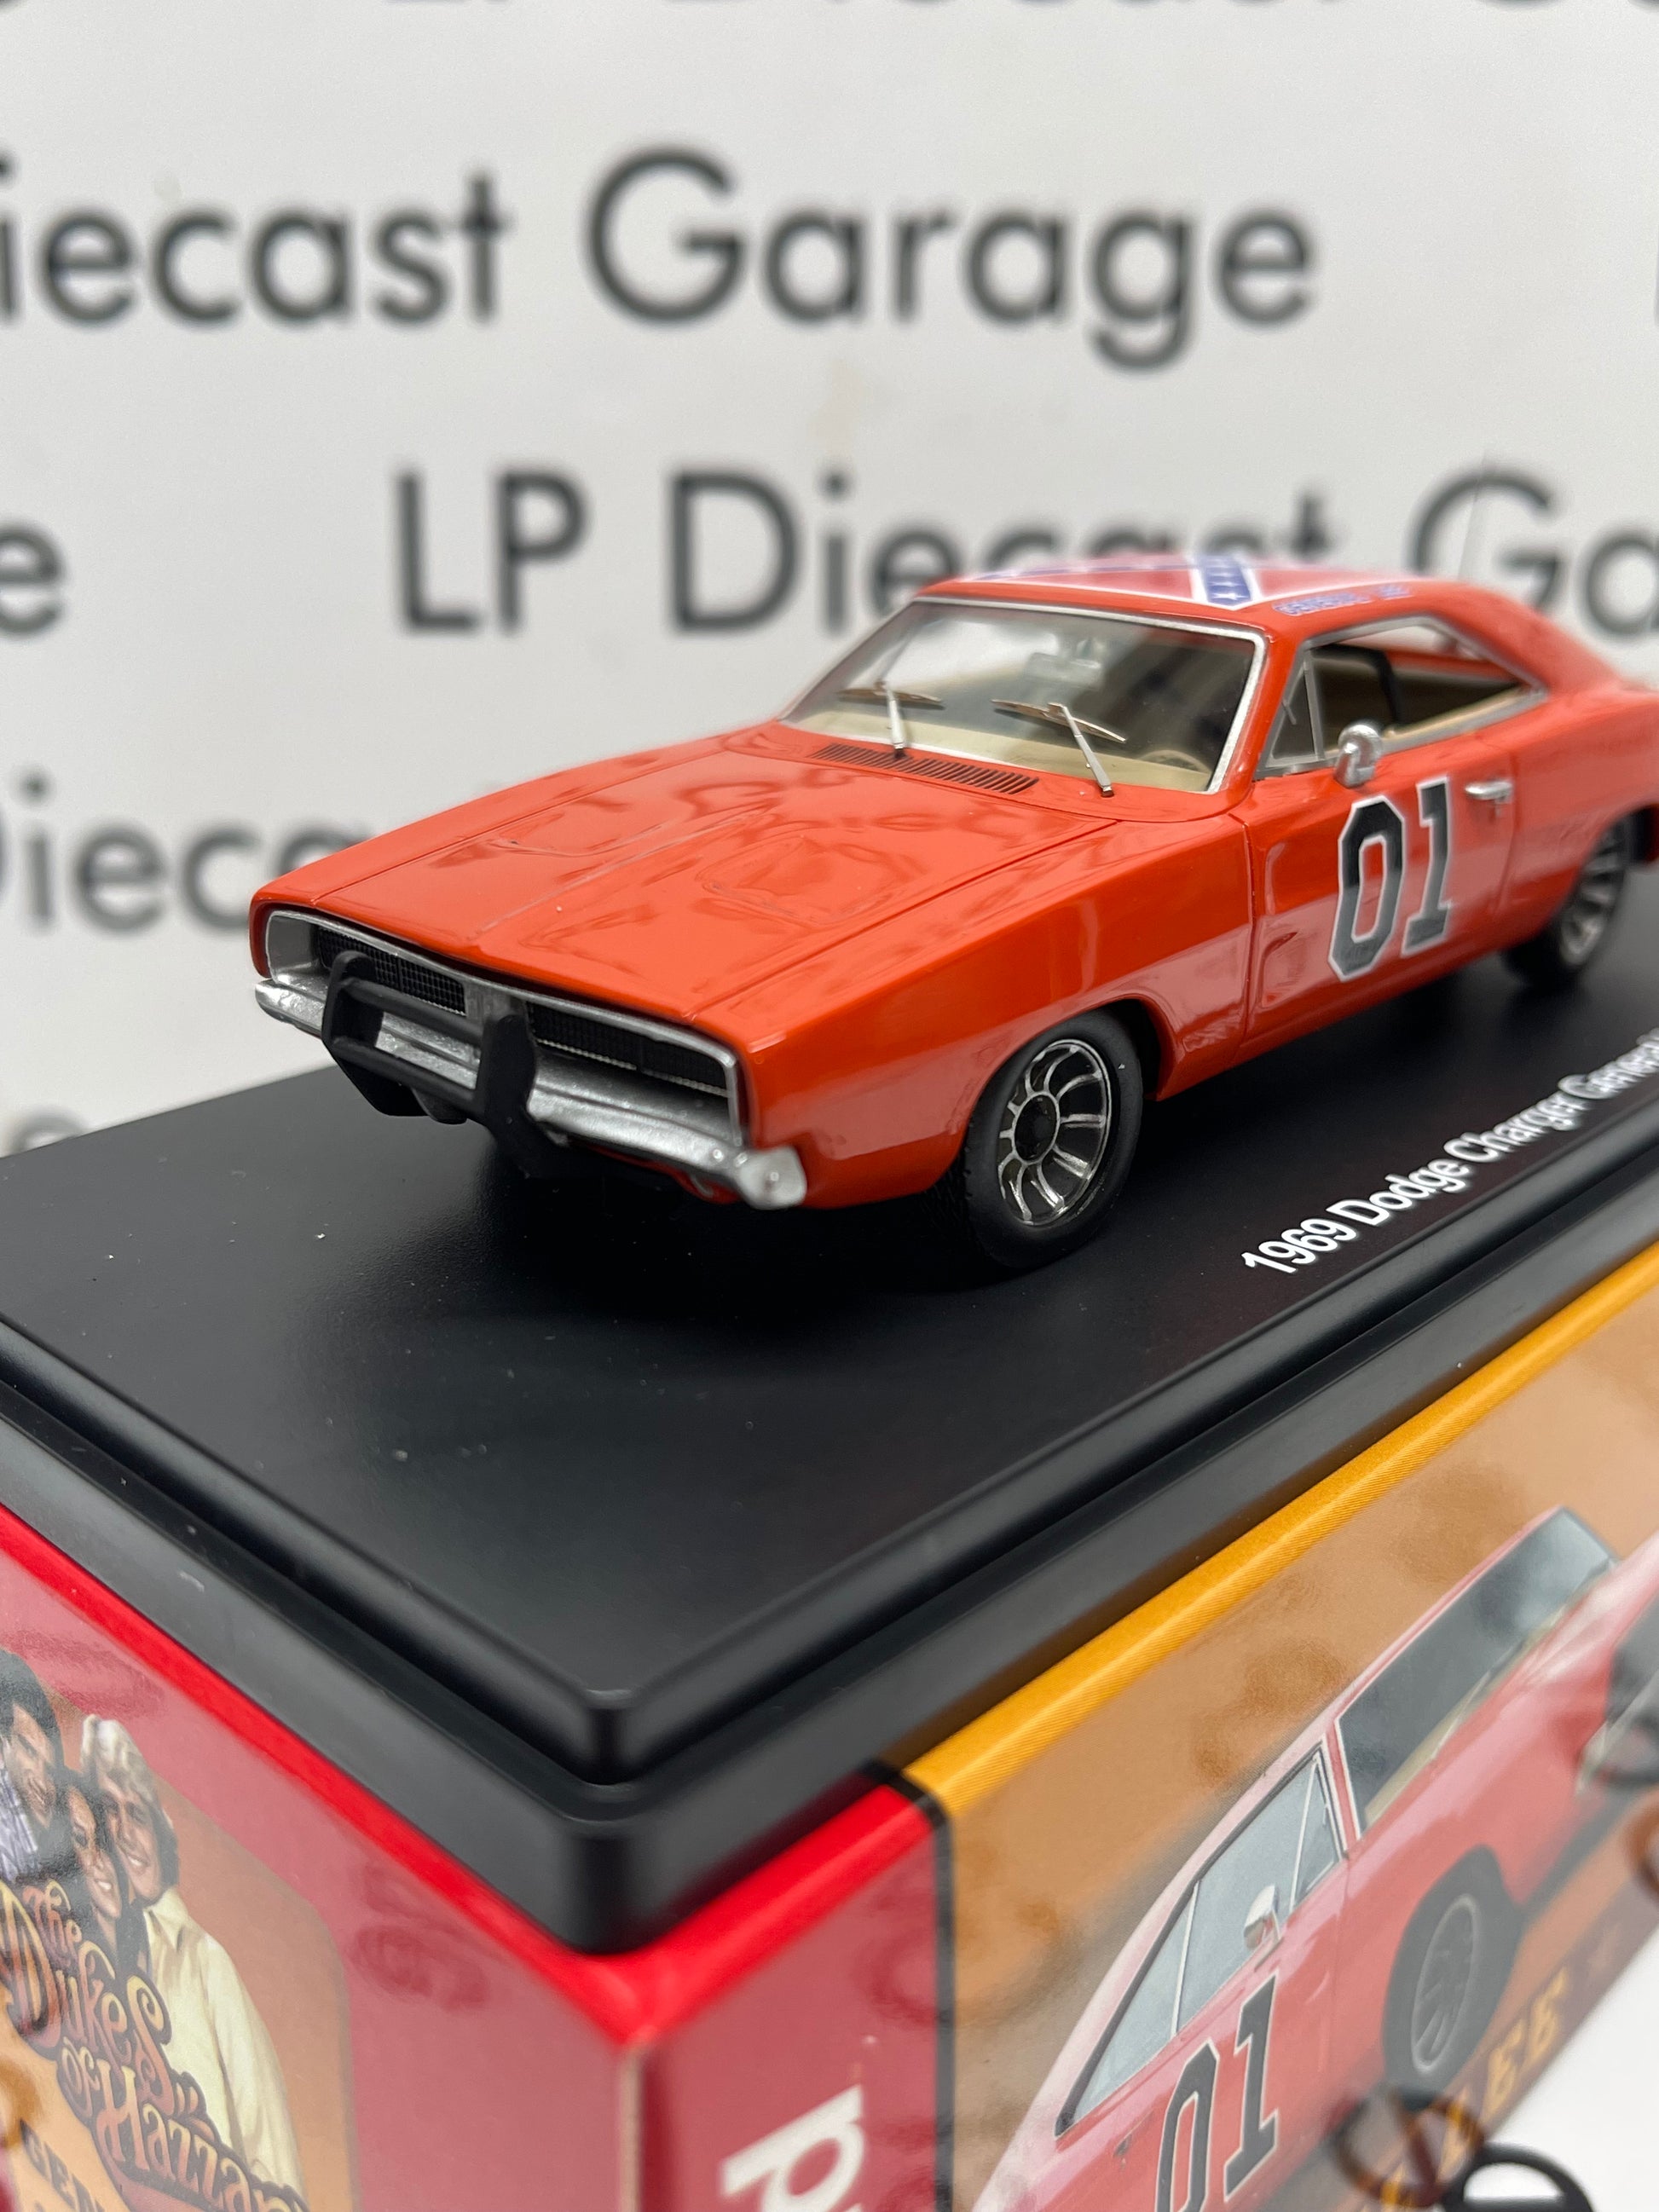 AUTO WORLD 1969 Dodge Charger General Lee Dukes of Hazzard 1:43 Resin – LP  Diecast Garage